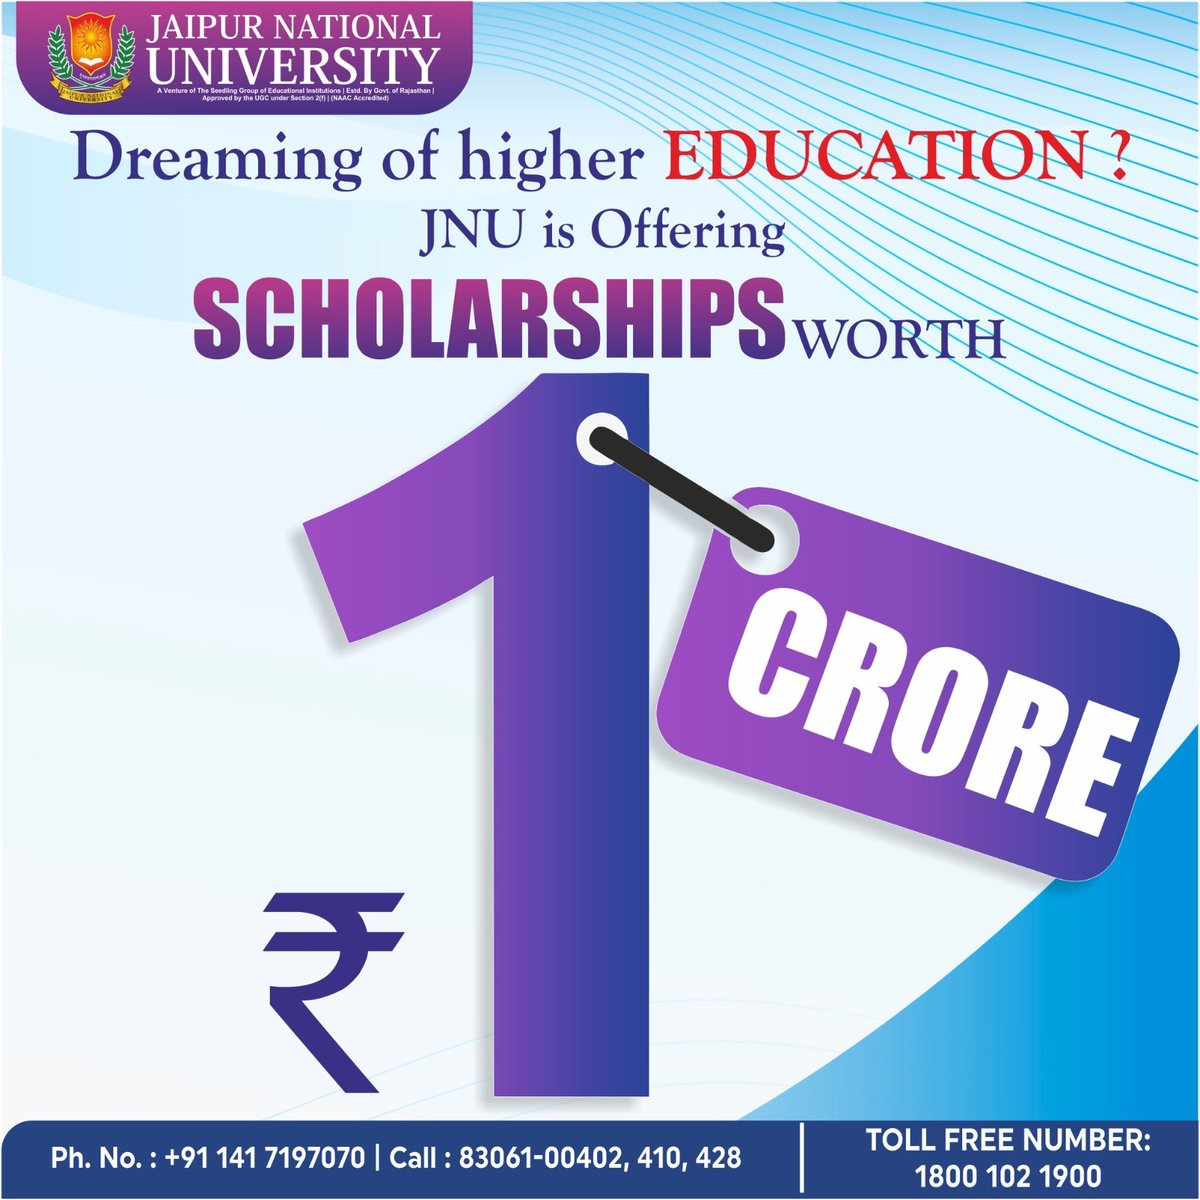 Your dream of higher education in a top institute is now possible with JNU Scholarship, worth 1 crore. Registration has begun. Apply now and gain financial support.

#Scholarships #HighereducationScholarship #EducationScholarship  #Financialaid #jaipurnationaluniversity